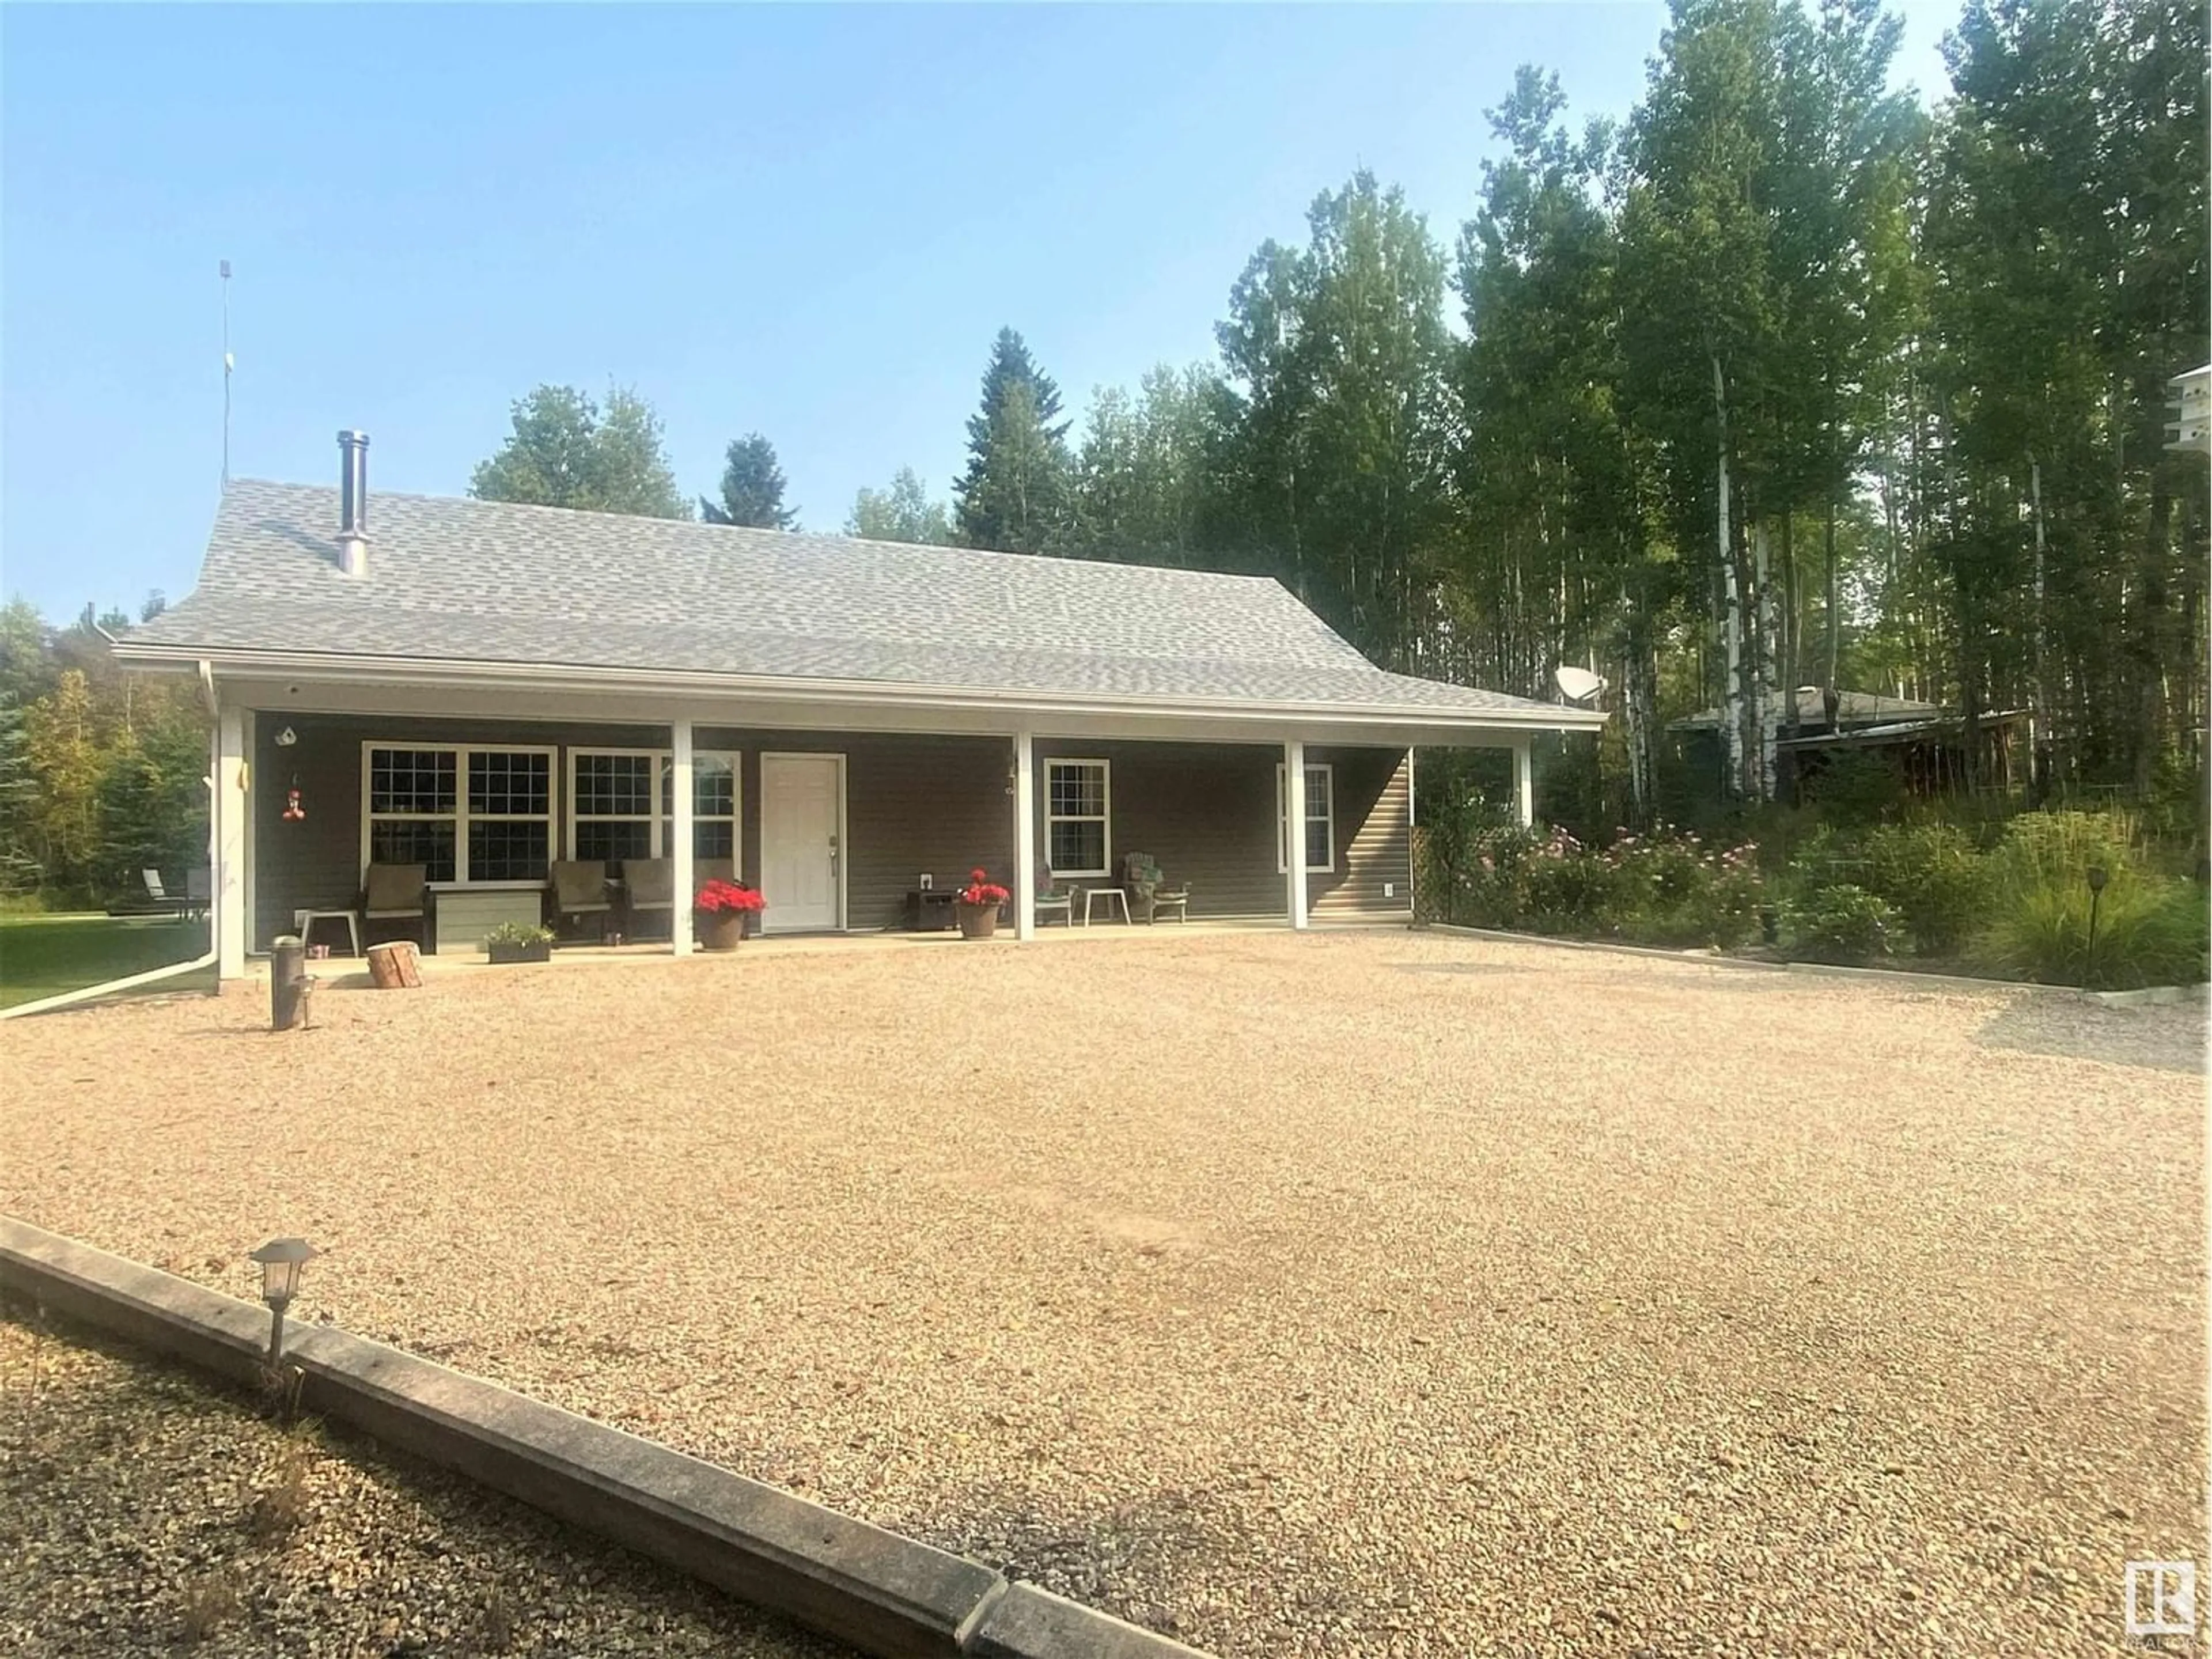 Outside view for 6 465036 RGE RD 61, Rural Wetaskiwin County Alberta T0C0T0